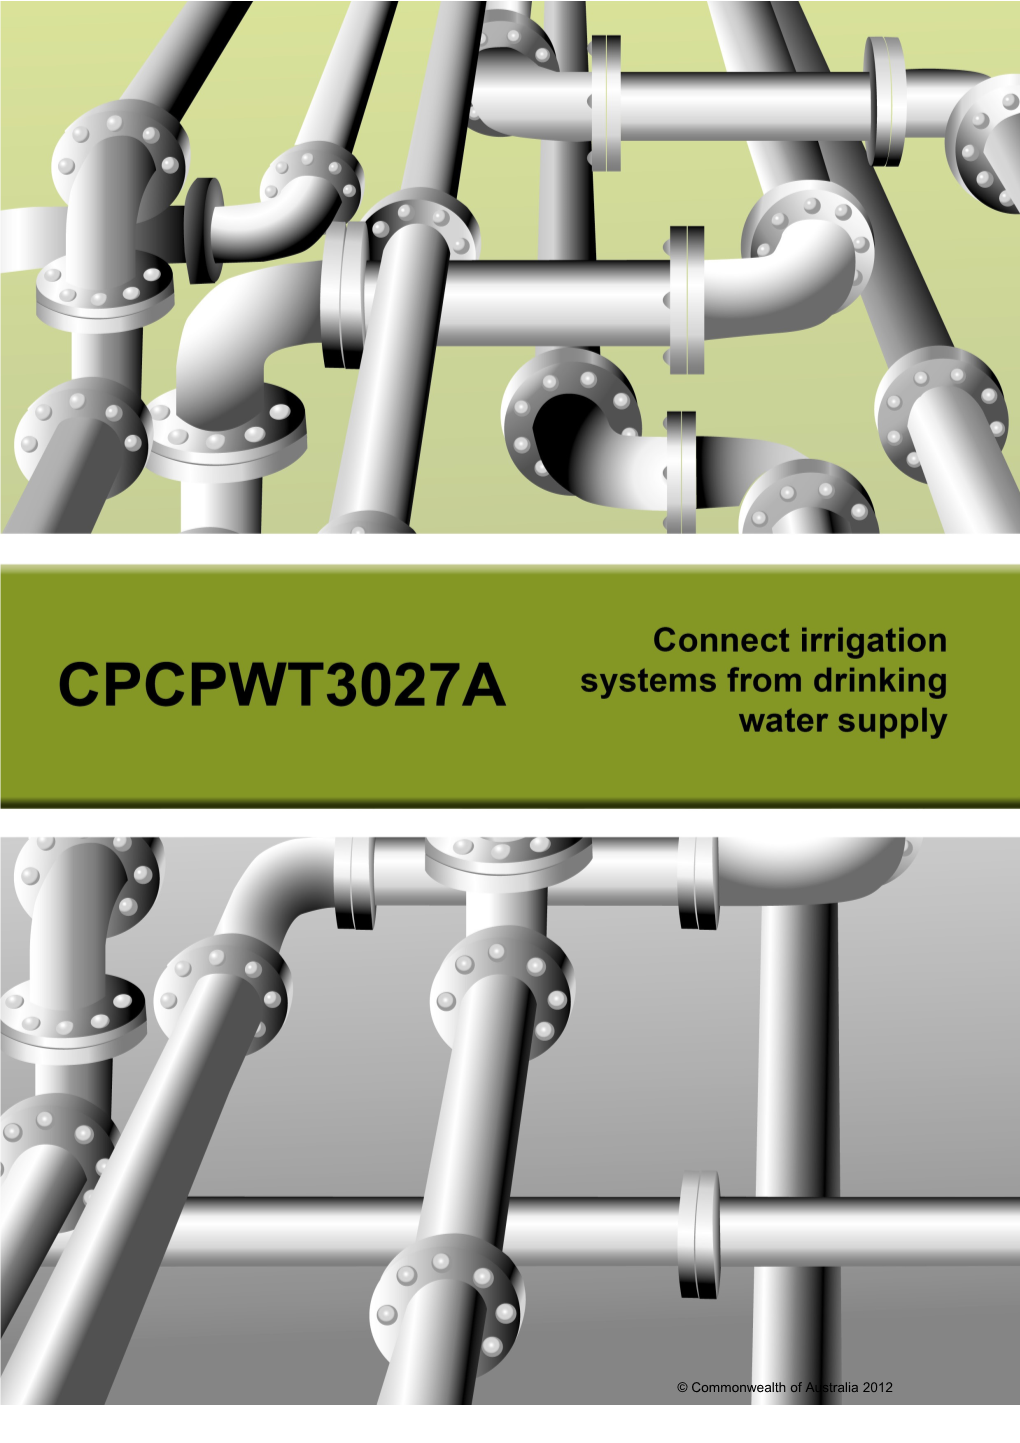 Cpcpwt3027a - Connect Irrigation Systems from Drinkable Water Supply